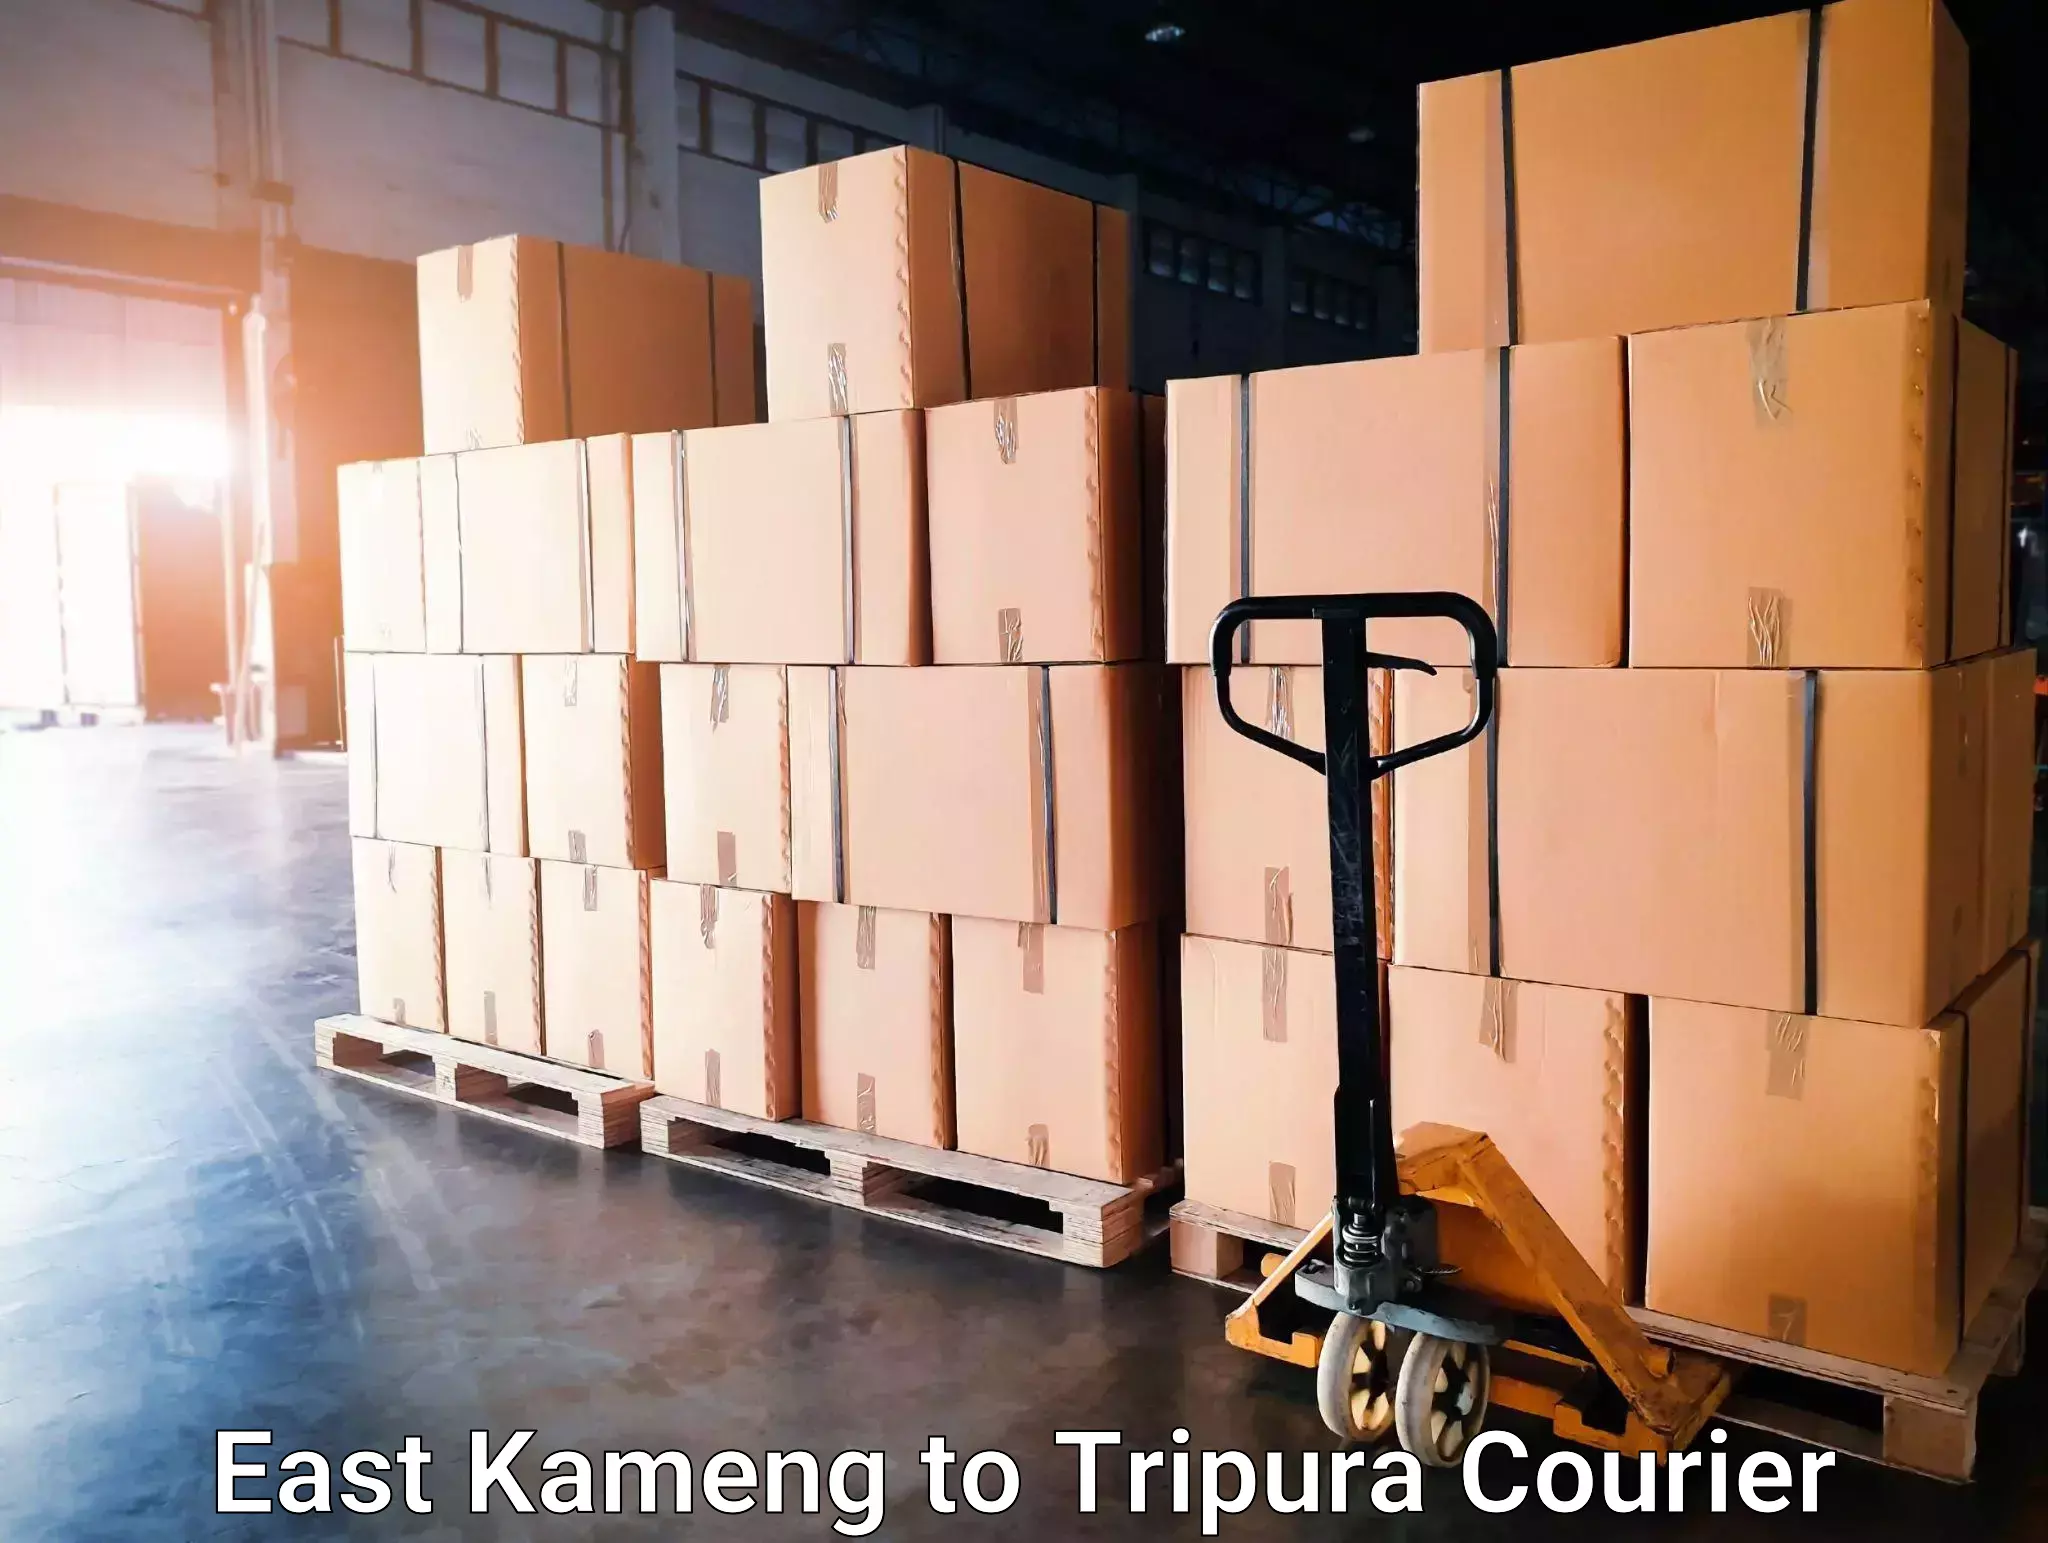 Courier service innovation East Kameng to Dhalai